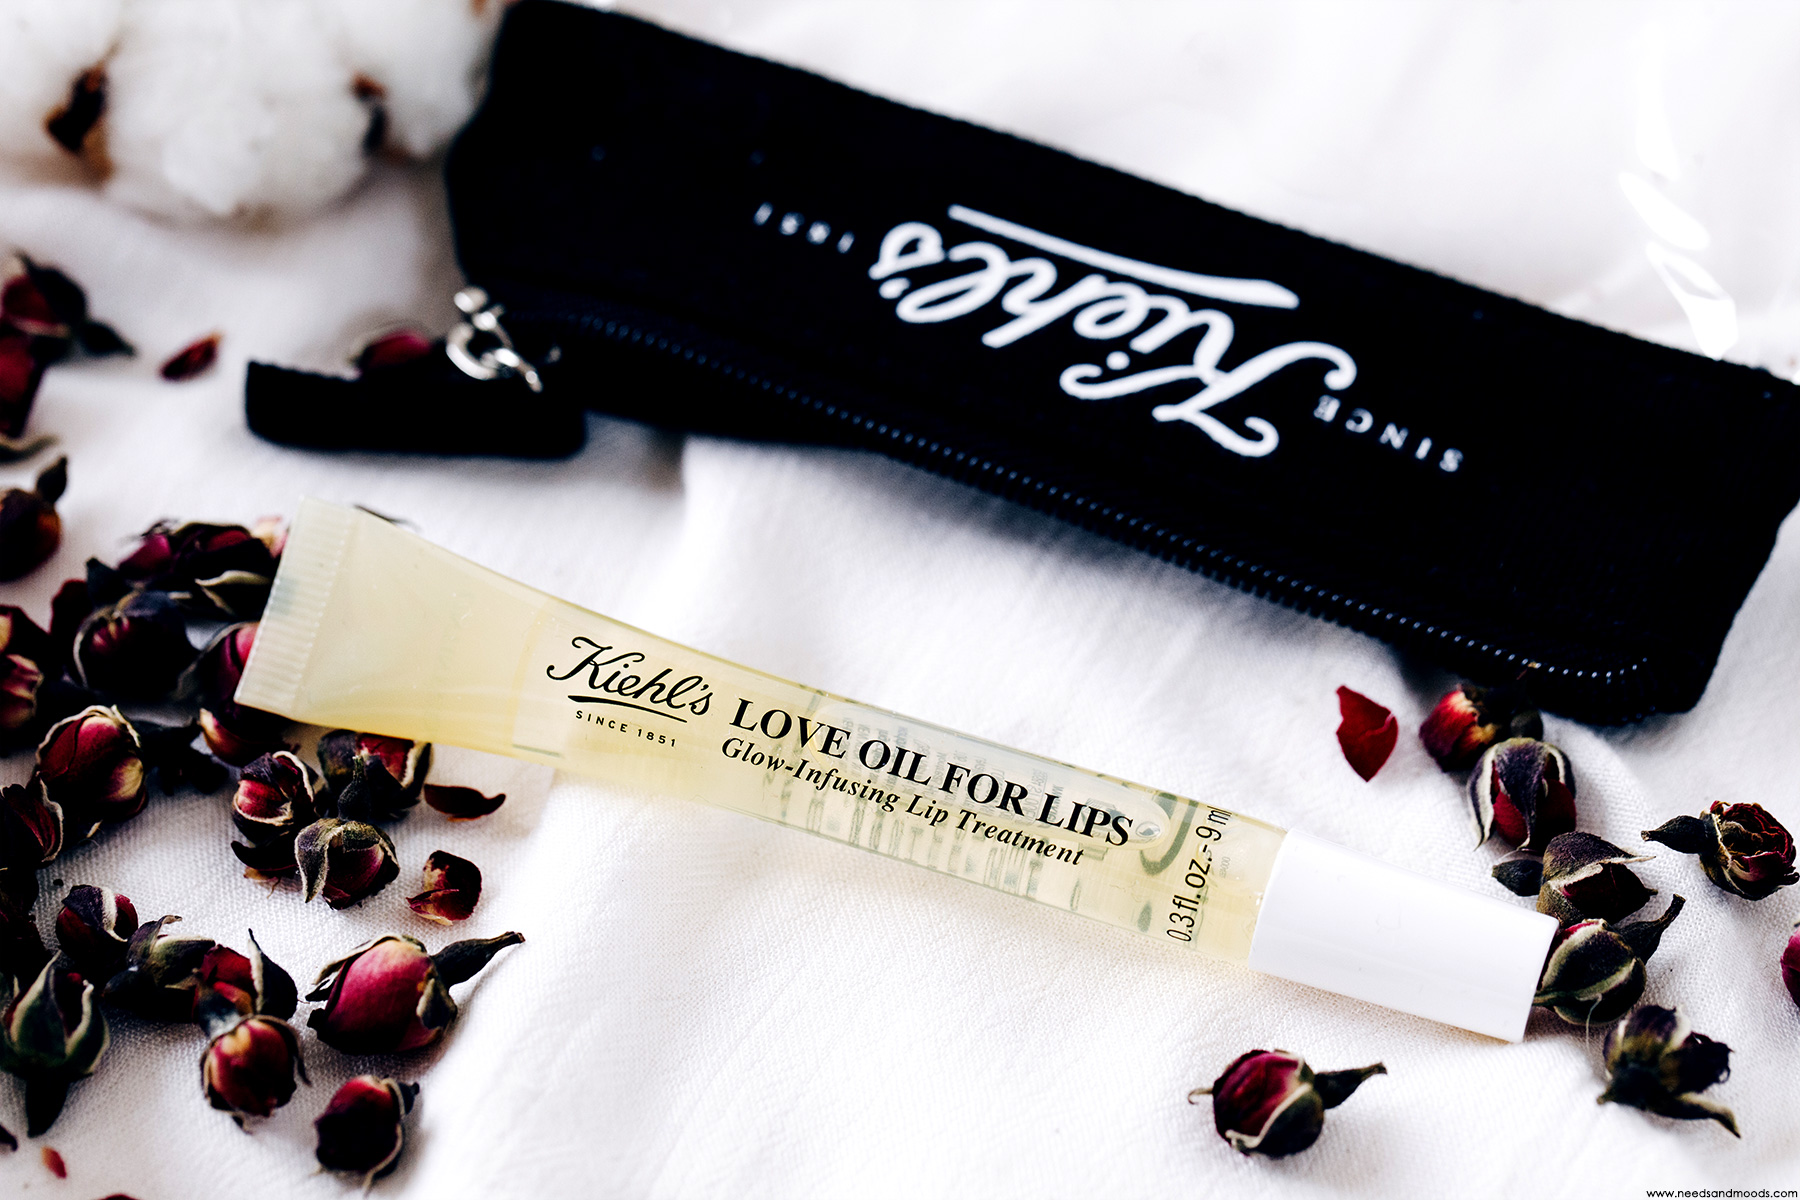 kiehls love oil for lips untinted